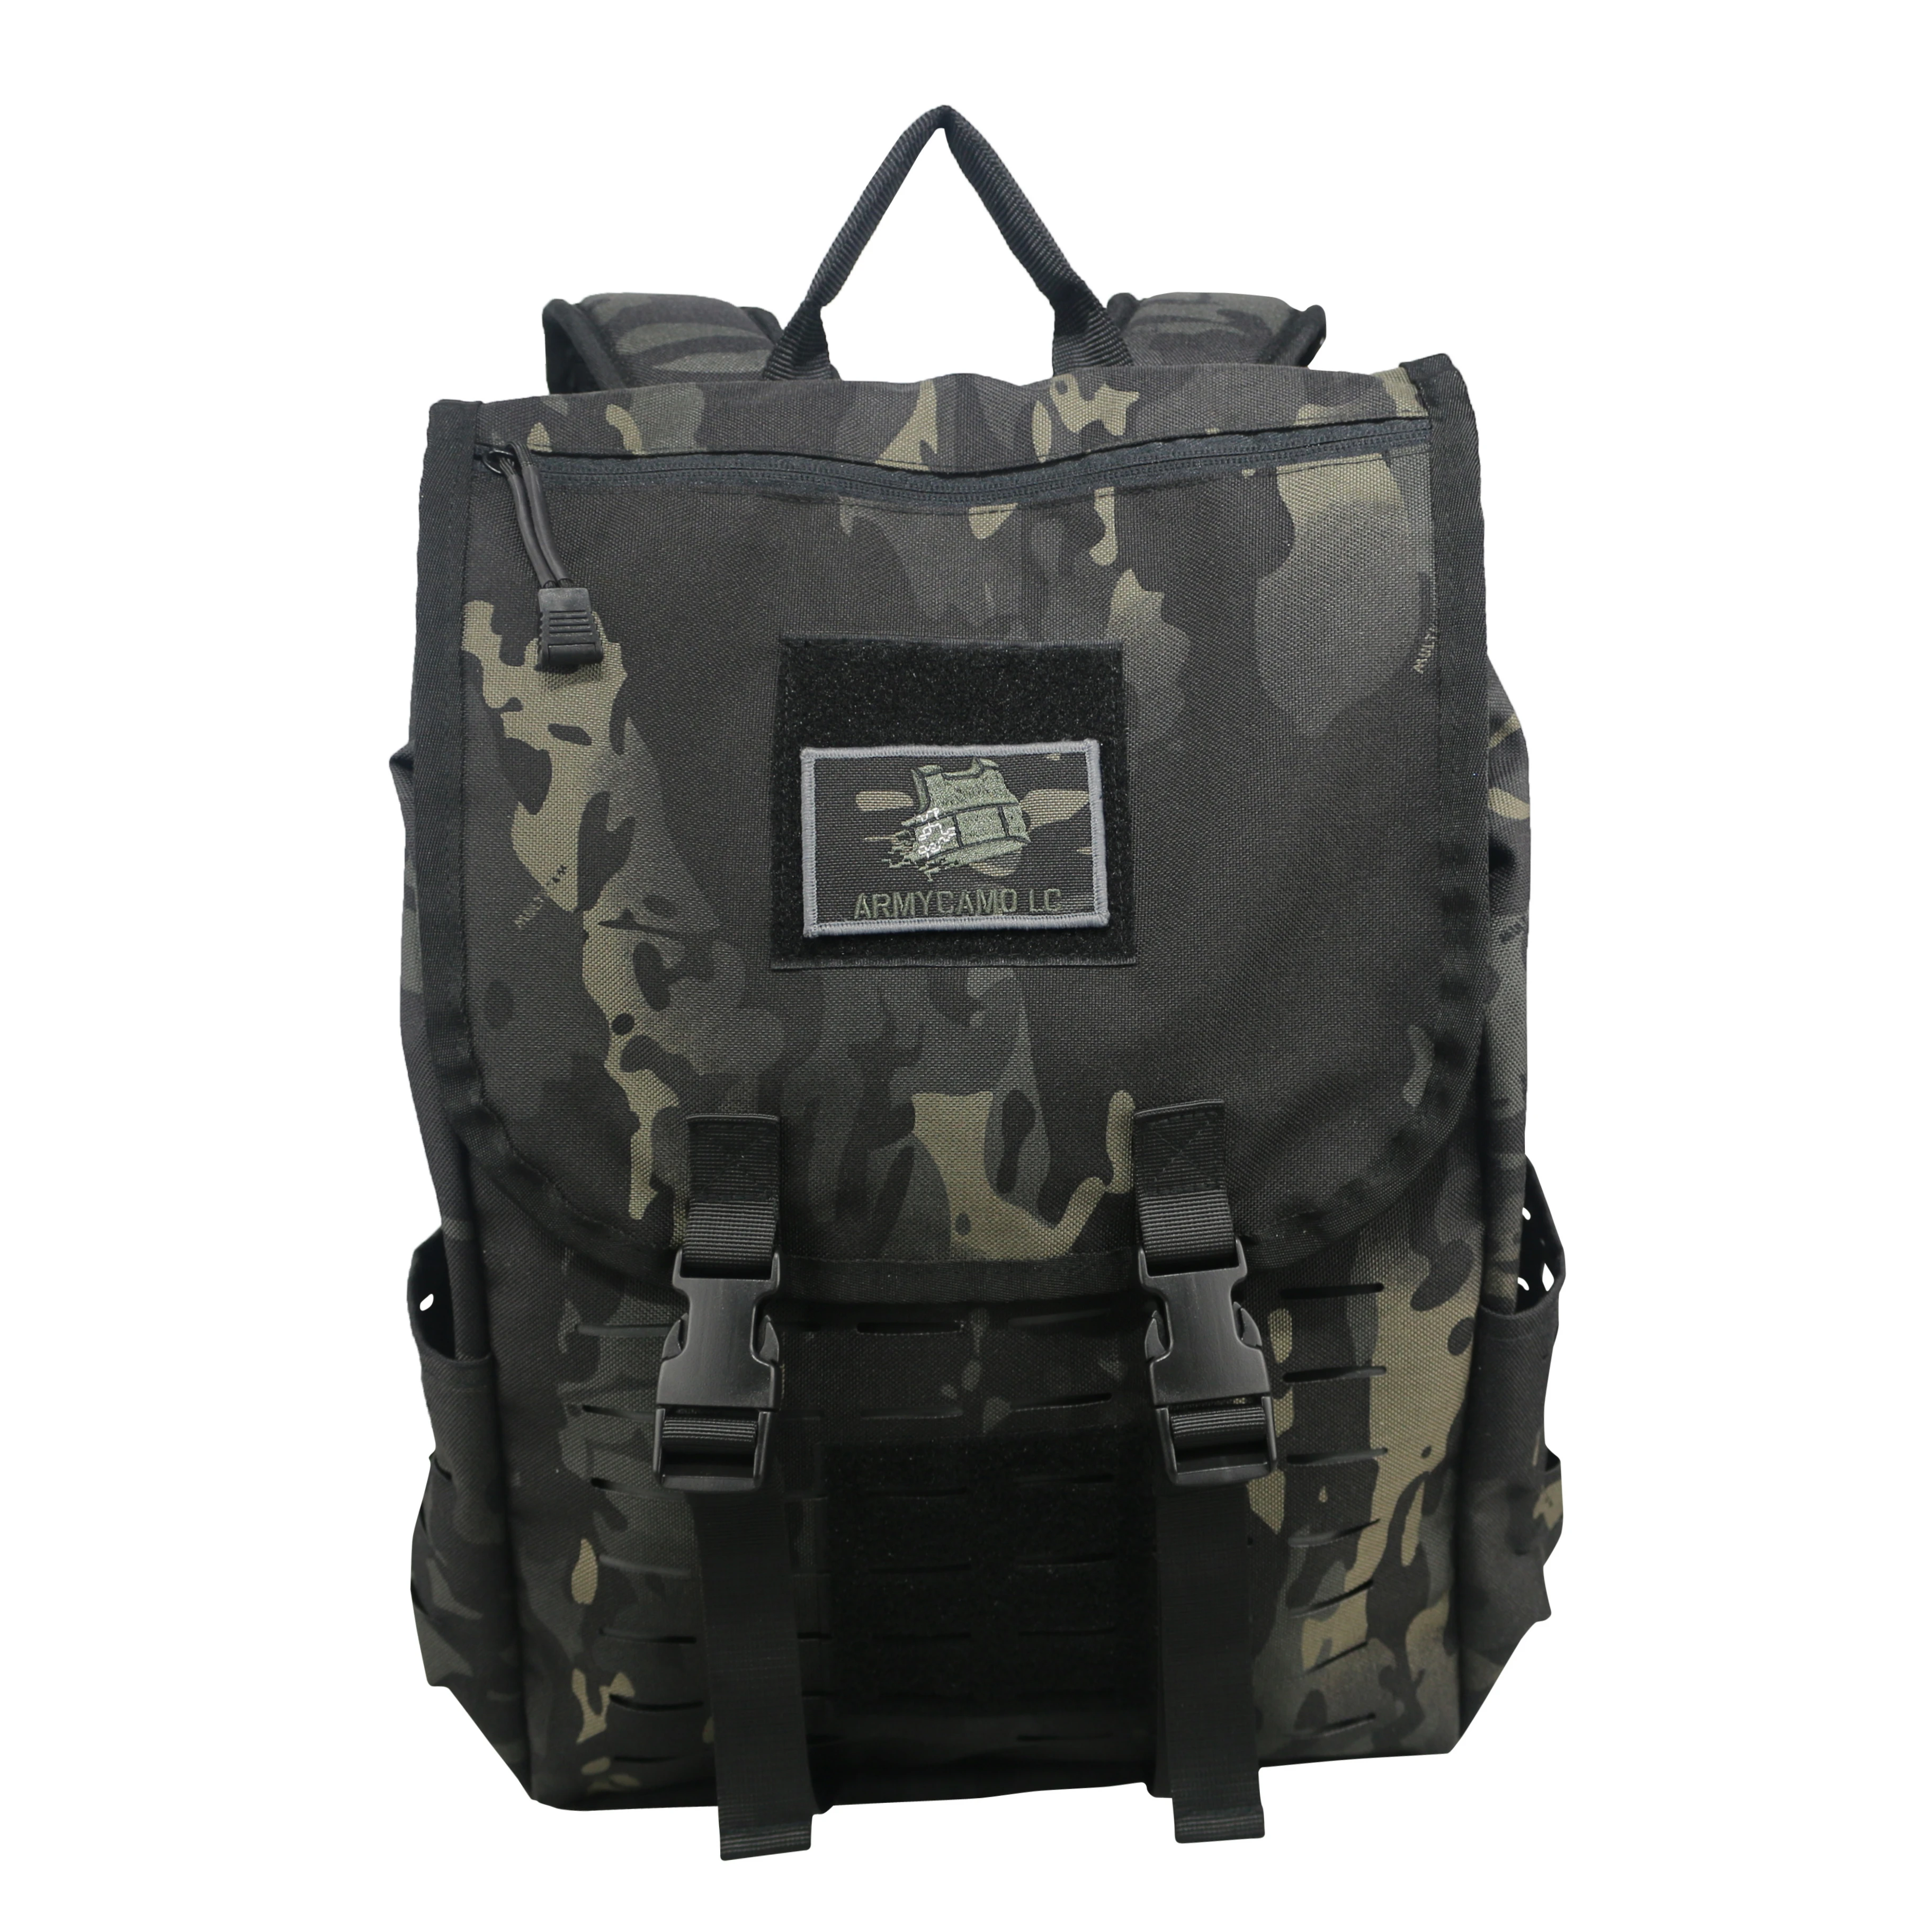 

New arrival sac a dos militaire heavy duty large military travel backpack hunting hiking outdoor sport bags tactical backpacks, Black multicam tactical backpackss